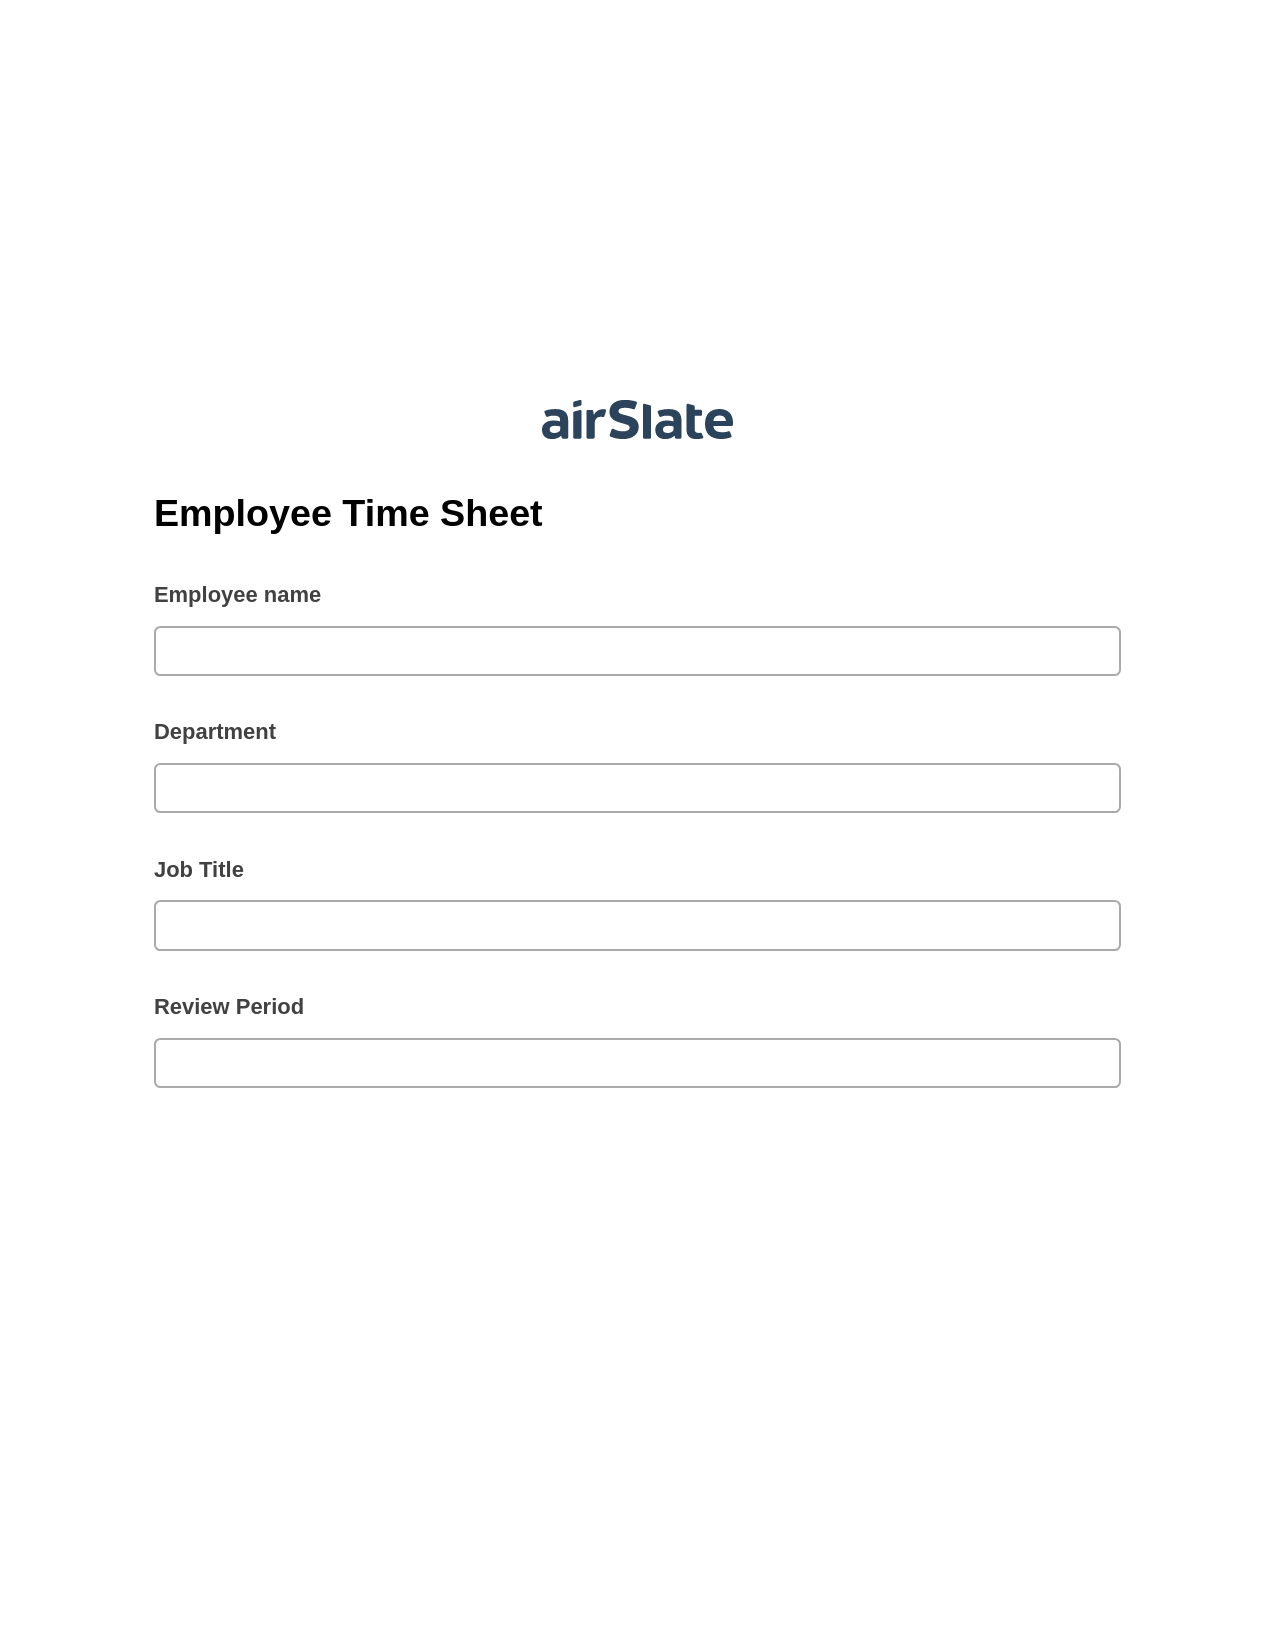 Employee Time Sheet Pre-fill Document Bot, Create Salesforce Records Bot, Archive to Dropbox Bot